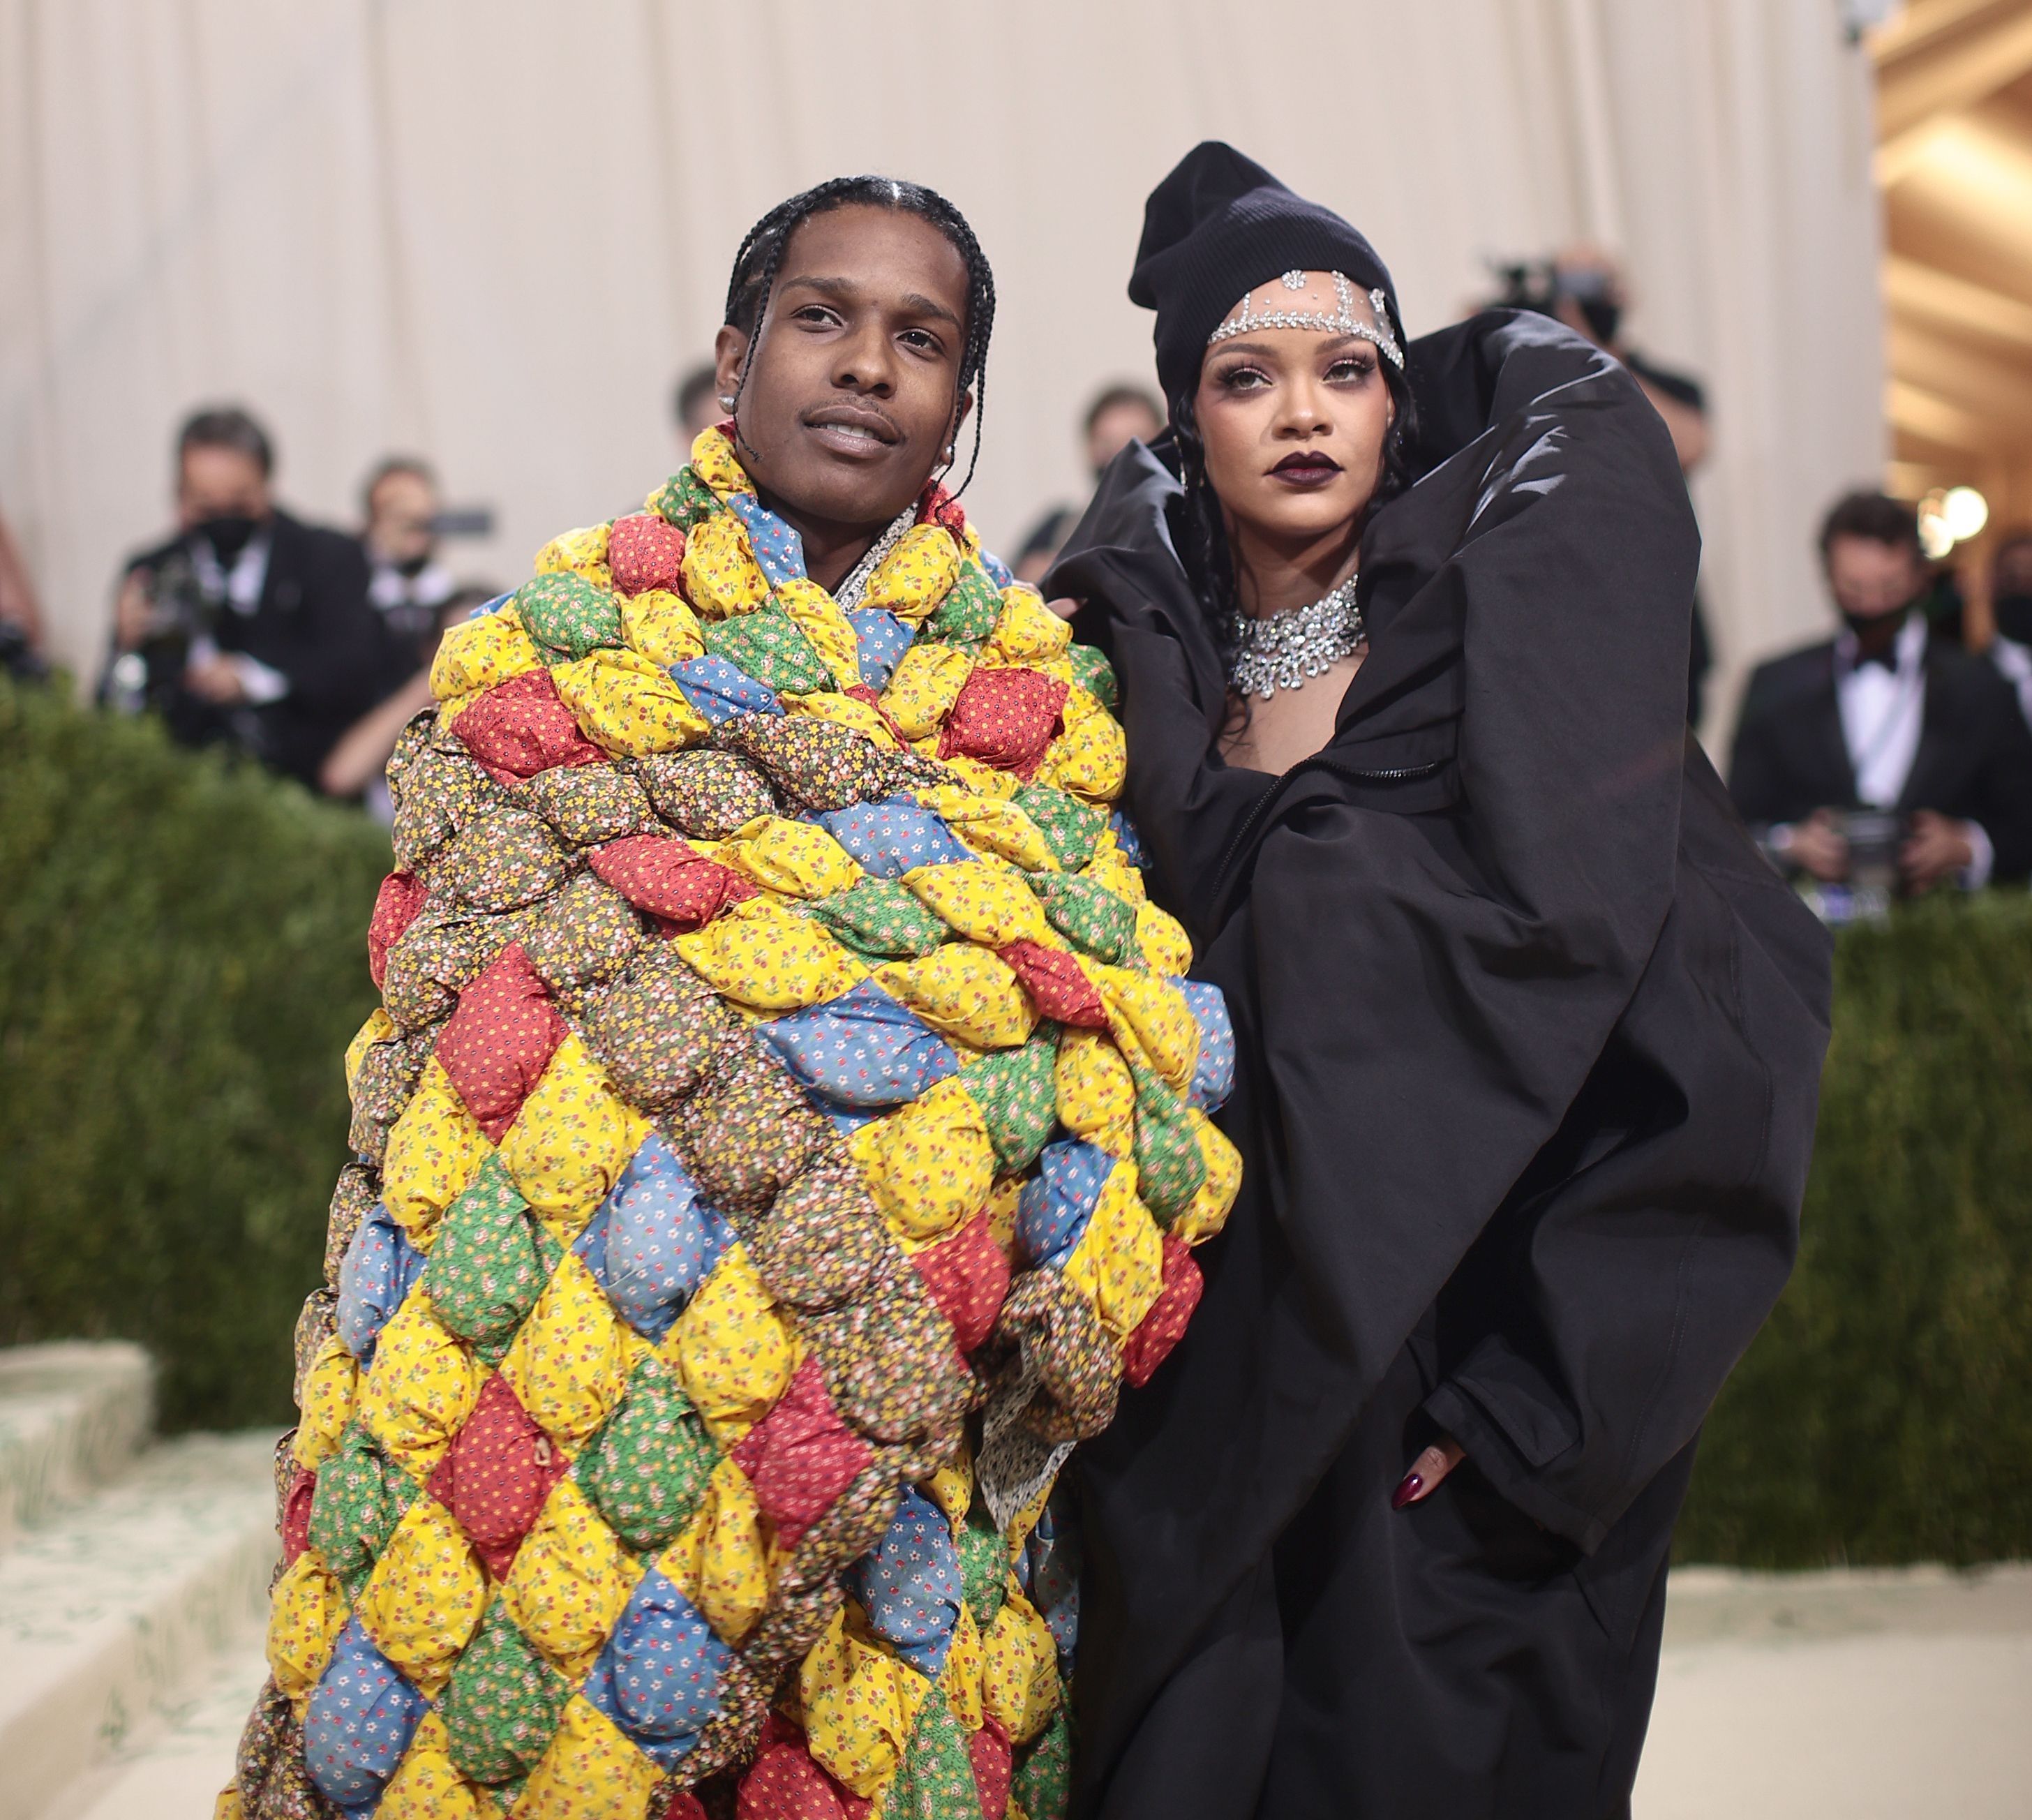 https://hips.hearstapps.com/hmg-prod/images/rocky-and-rihanna-attend-the-2021-met-gala-celebrating-in-news-photo-1647889594.jpg